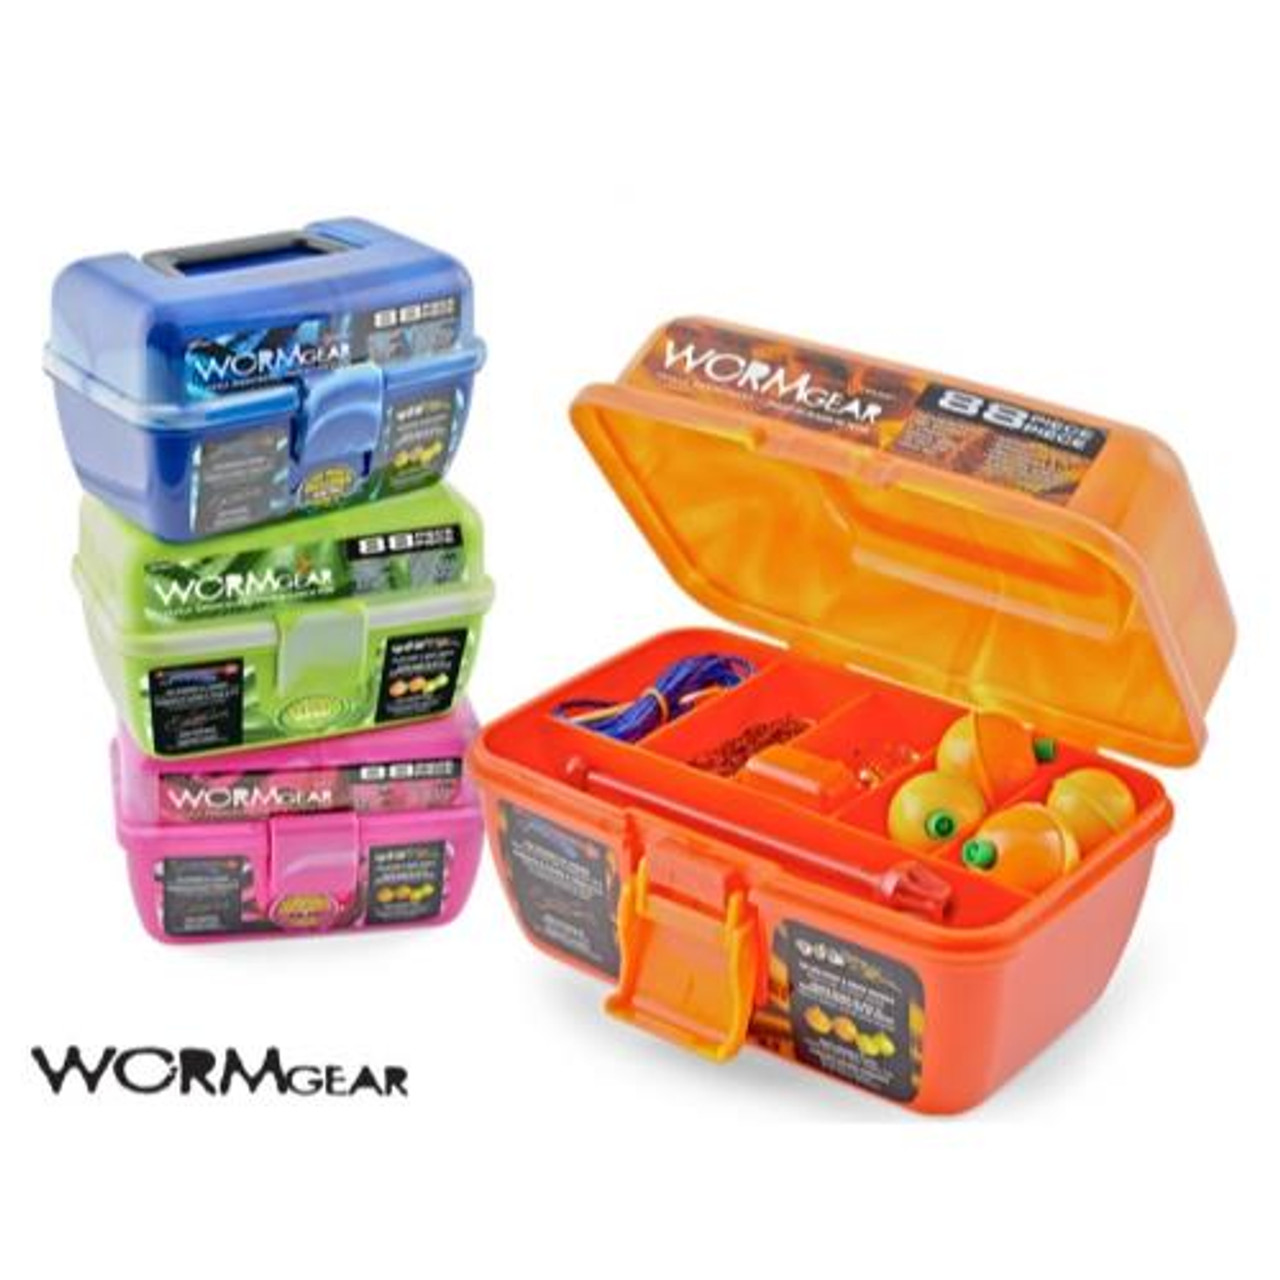 https://cdn11.bigcommerce.com/s-stfpjhht/images/stencil/1280x1280/products/11628/26355/South-Bend-Worm-Gear-88-Piece-Loaded-Tackle-Box-Kit-039364141395_image1__48103.1514940784.jpg?c=2